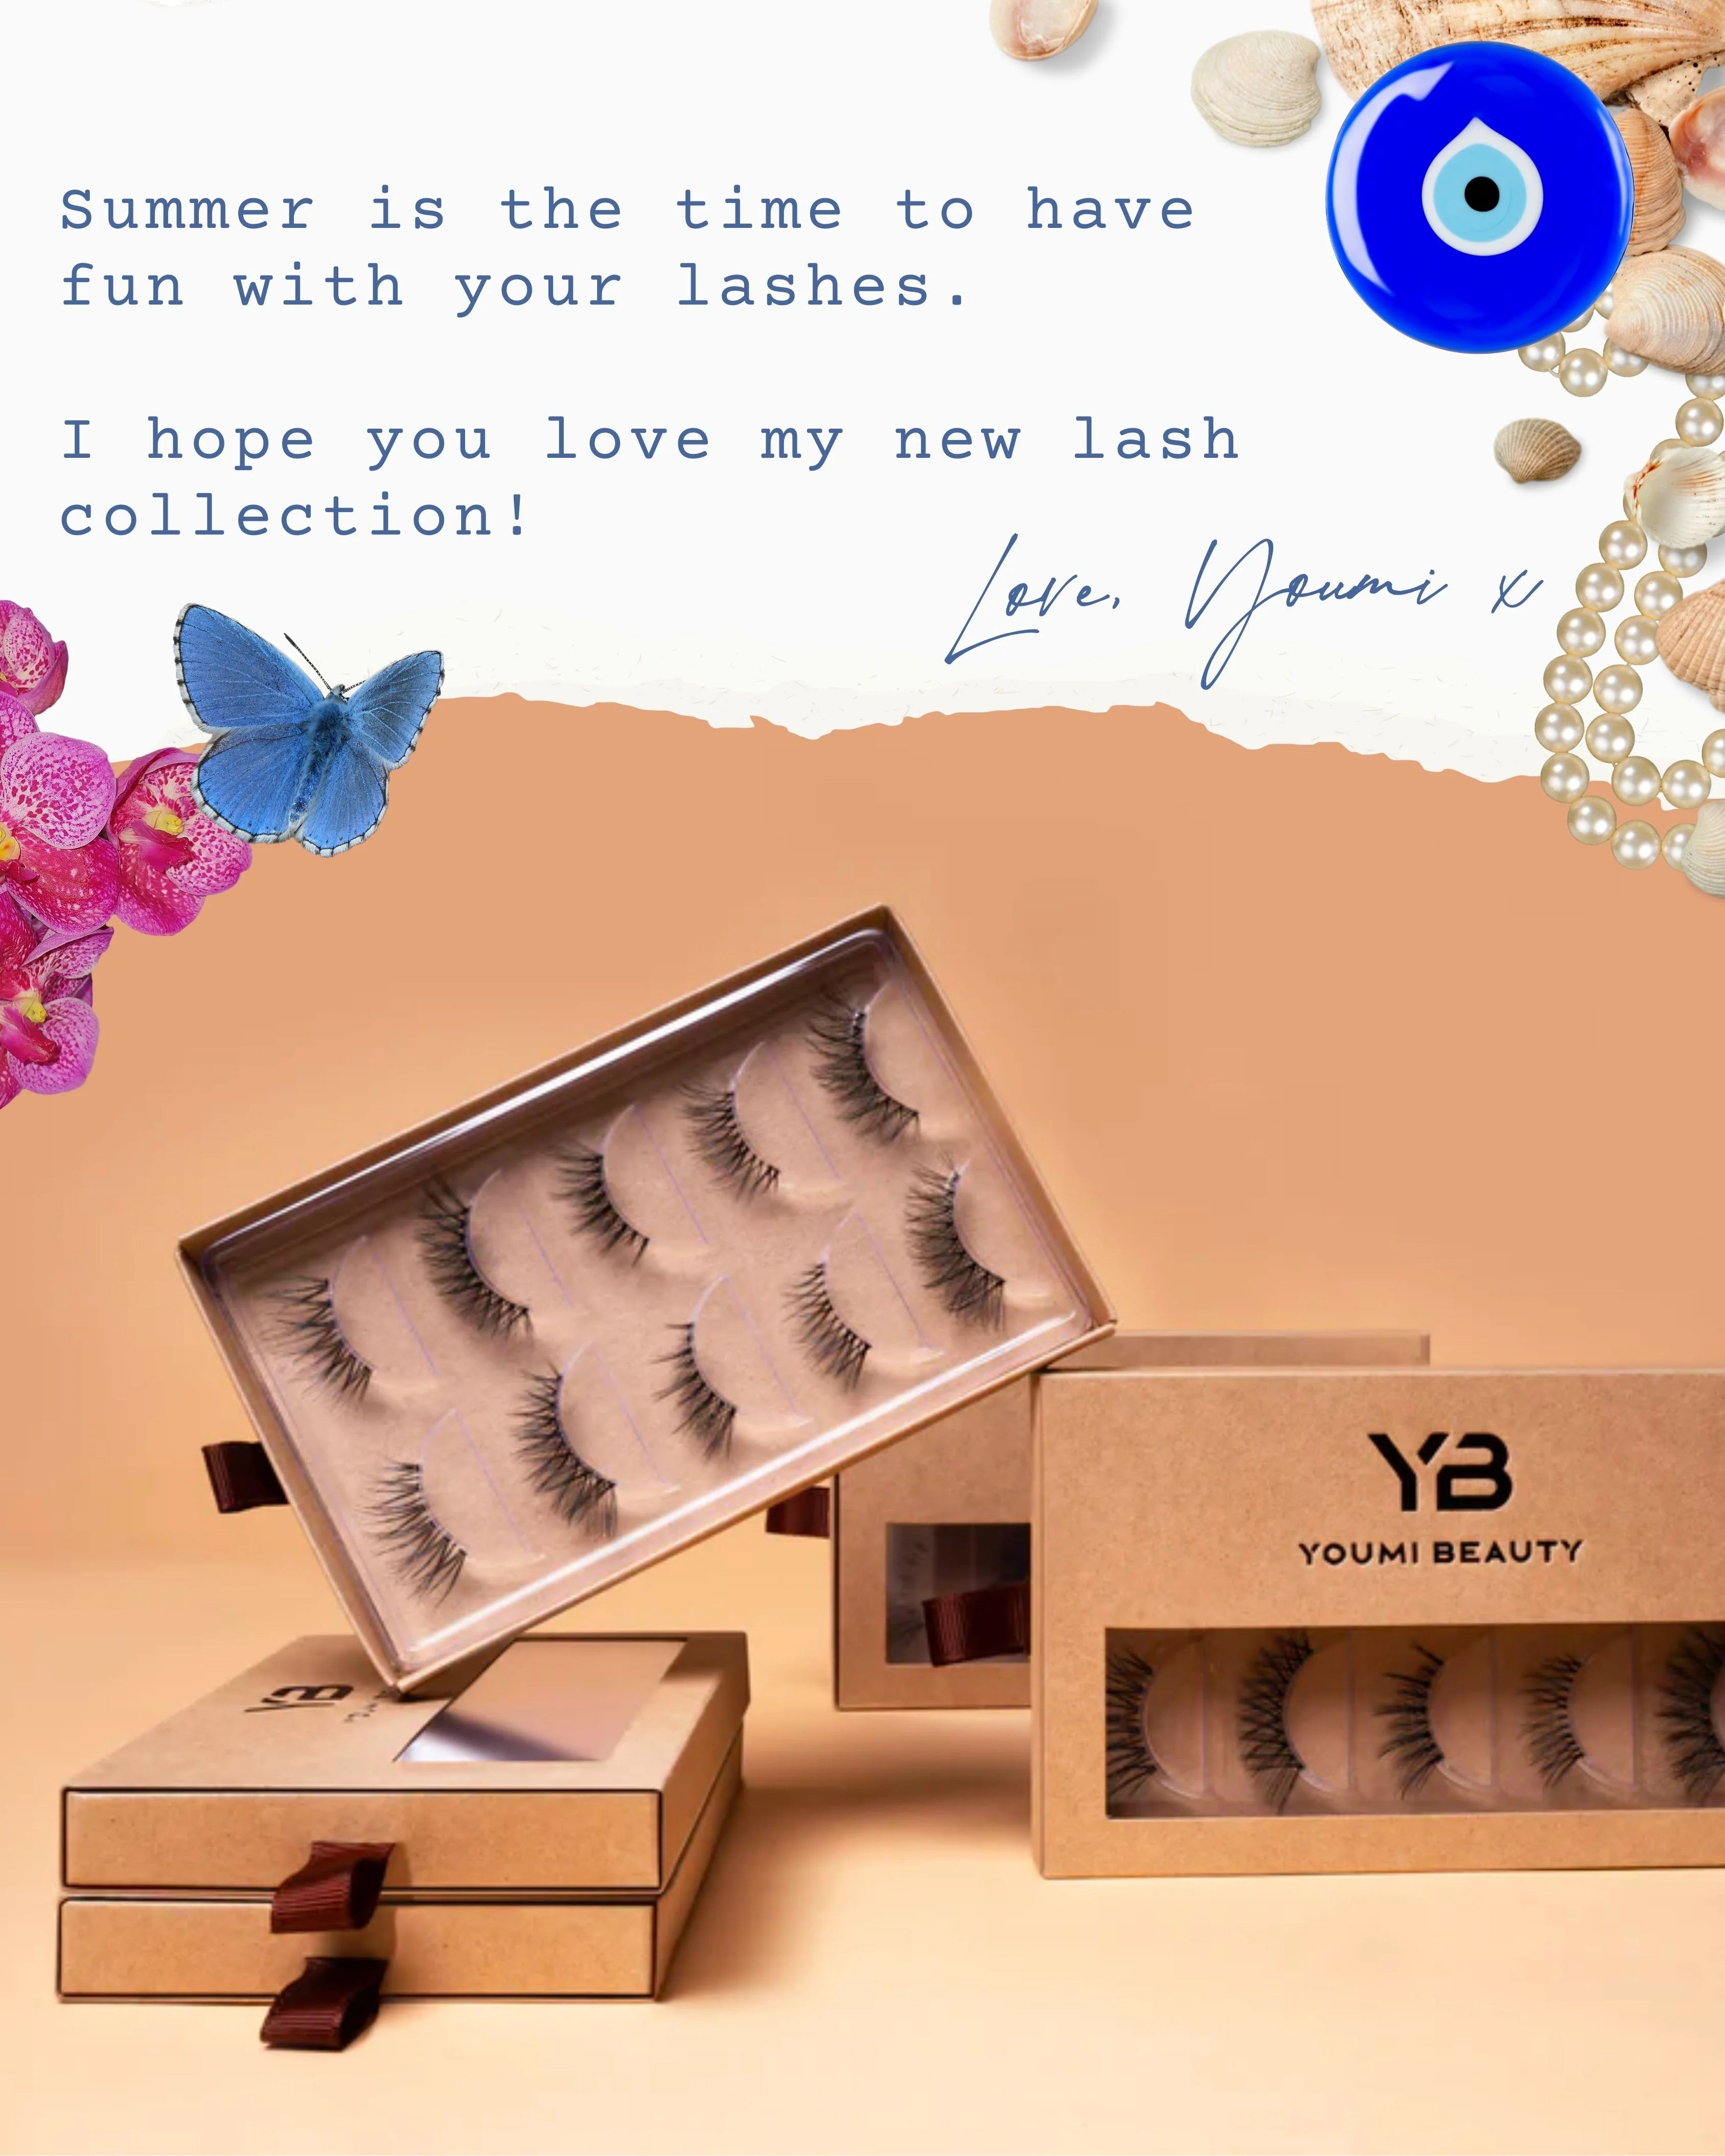 YOUMI BEAUTY - SUMMER LASHES يومي بيوتي